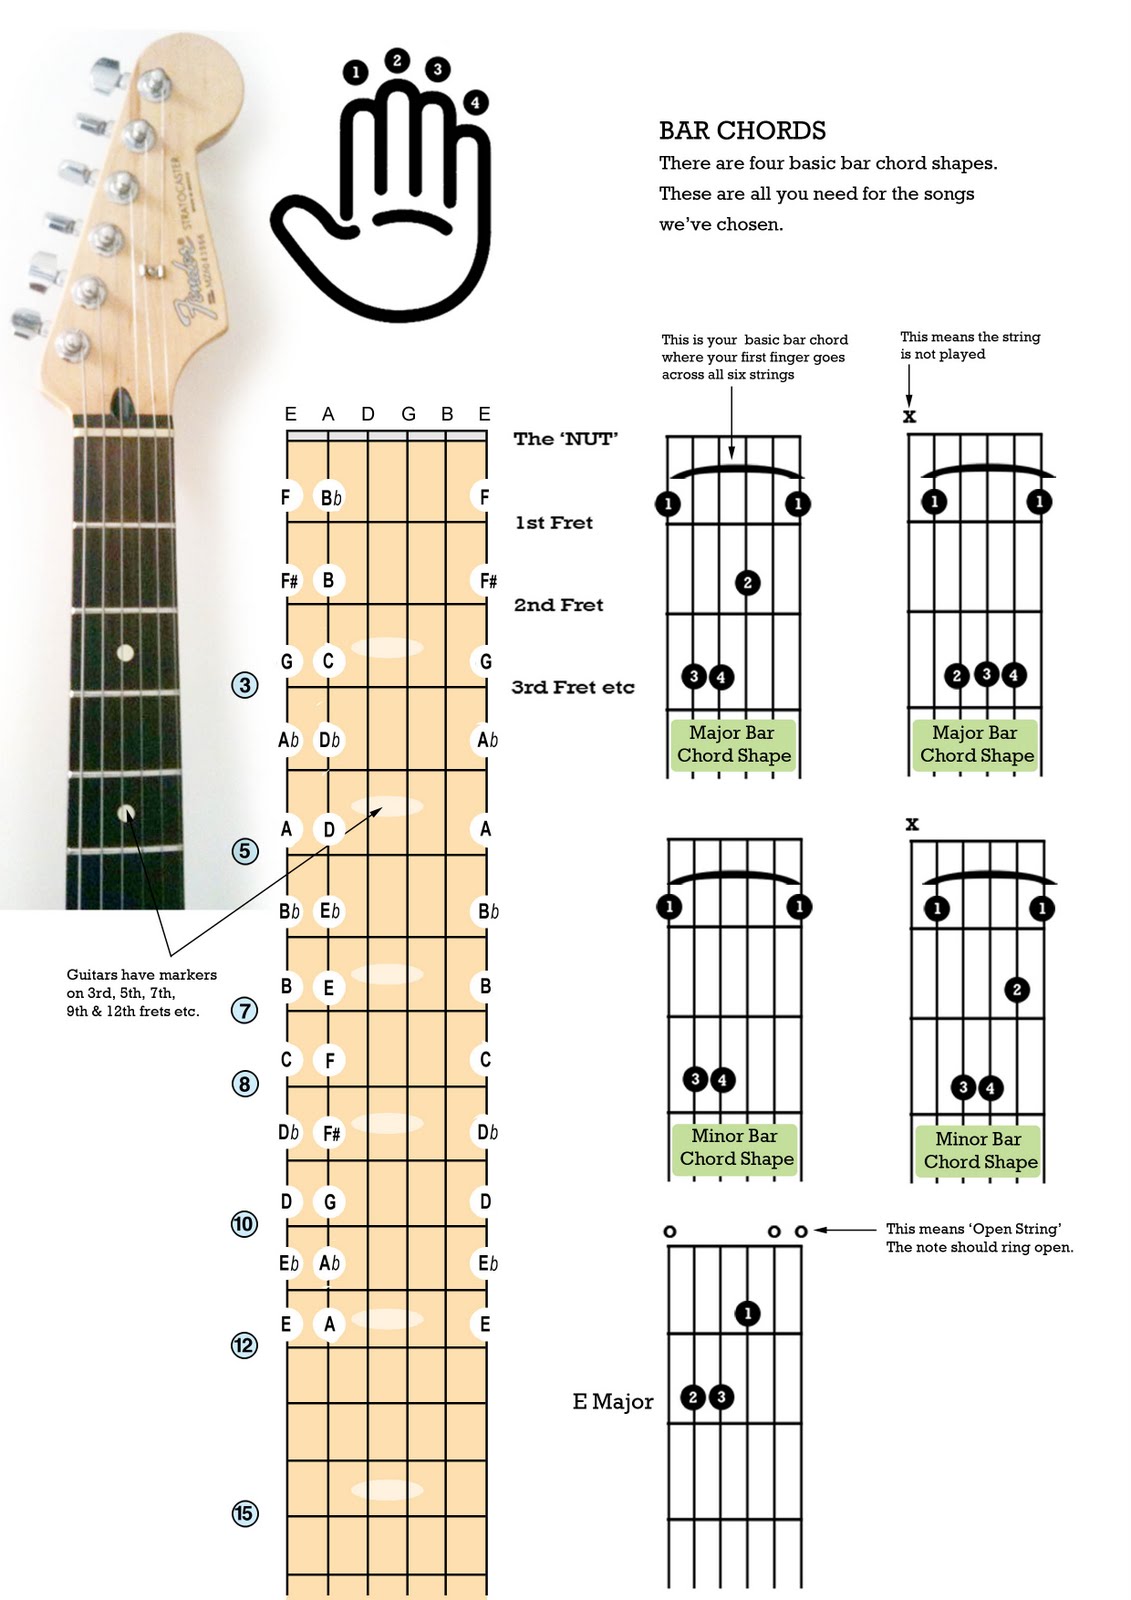 Gallery of A4 Guitar Chord.